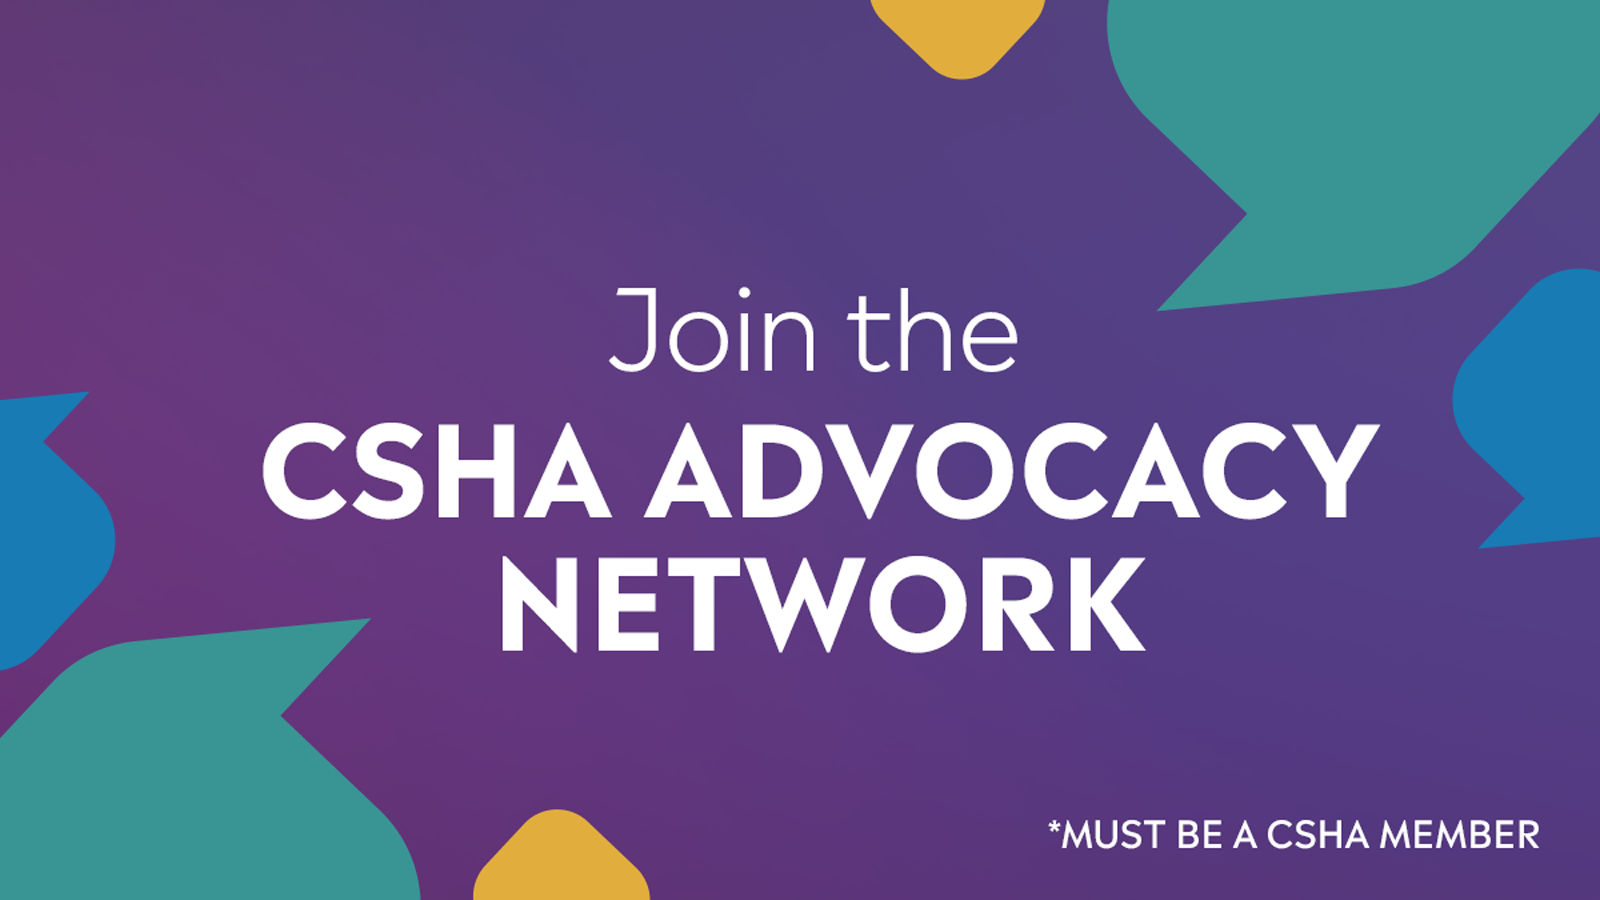 Sign up for the CSHA Advocacy Network